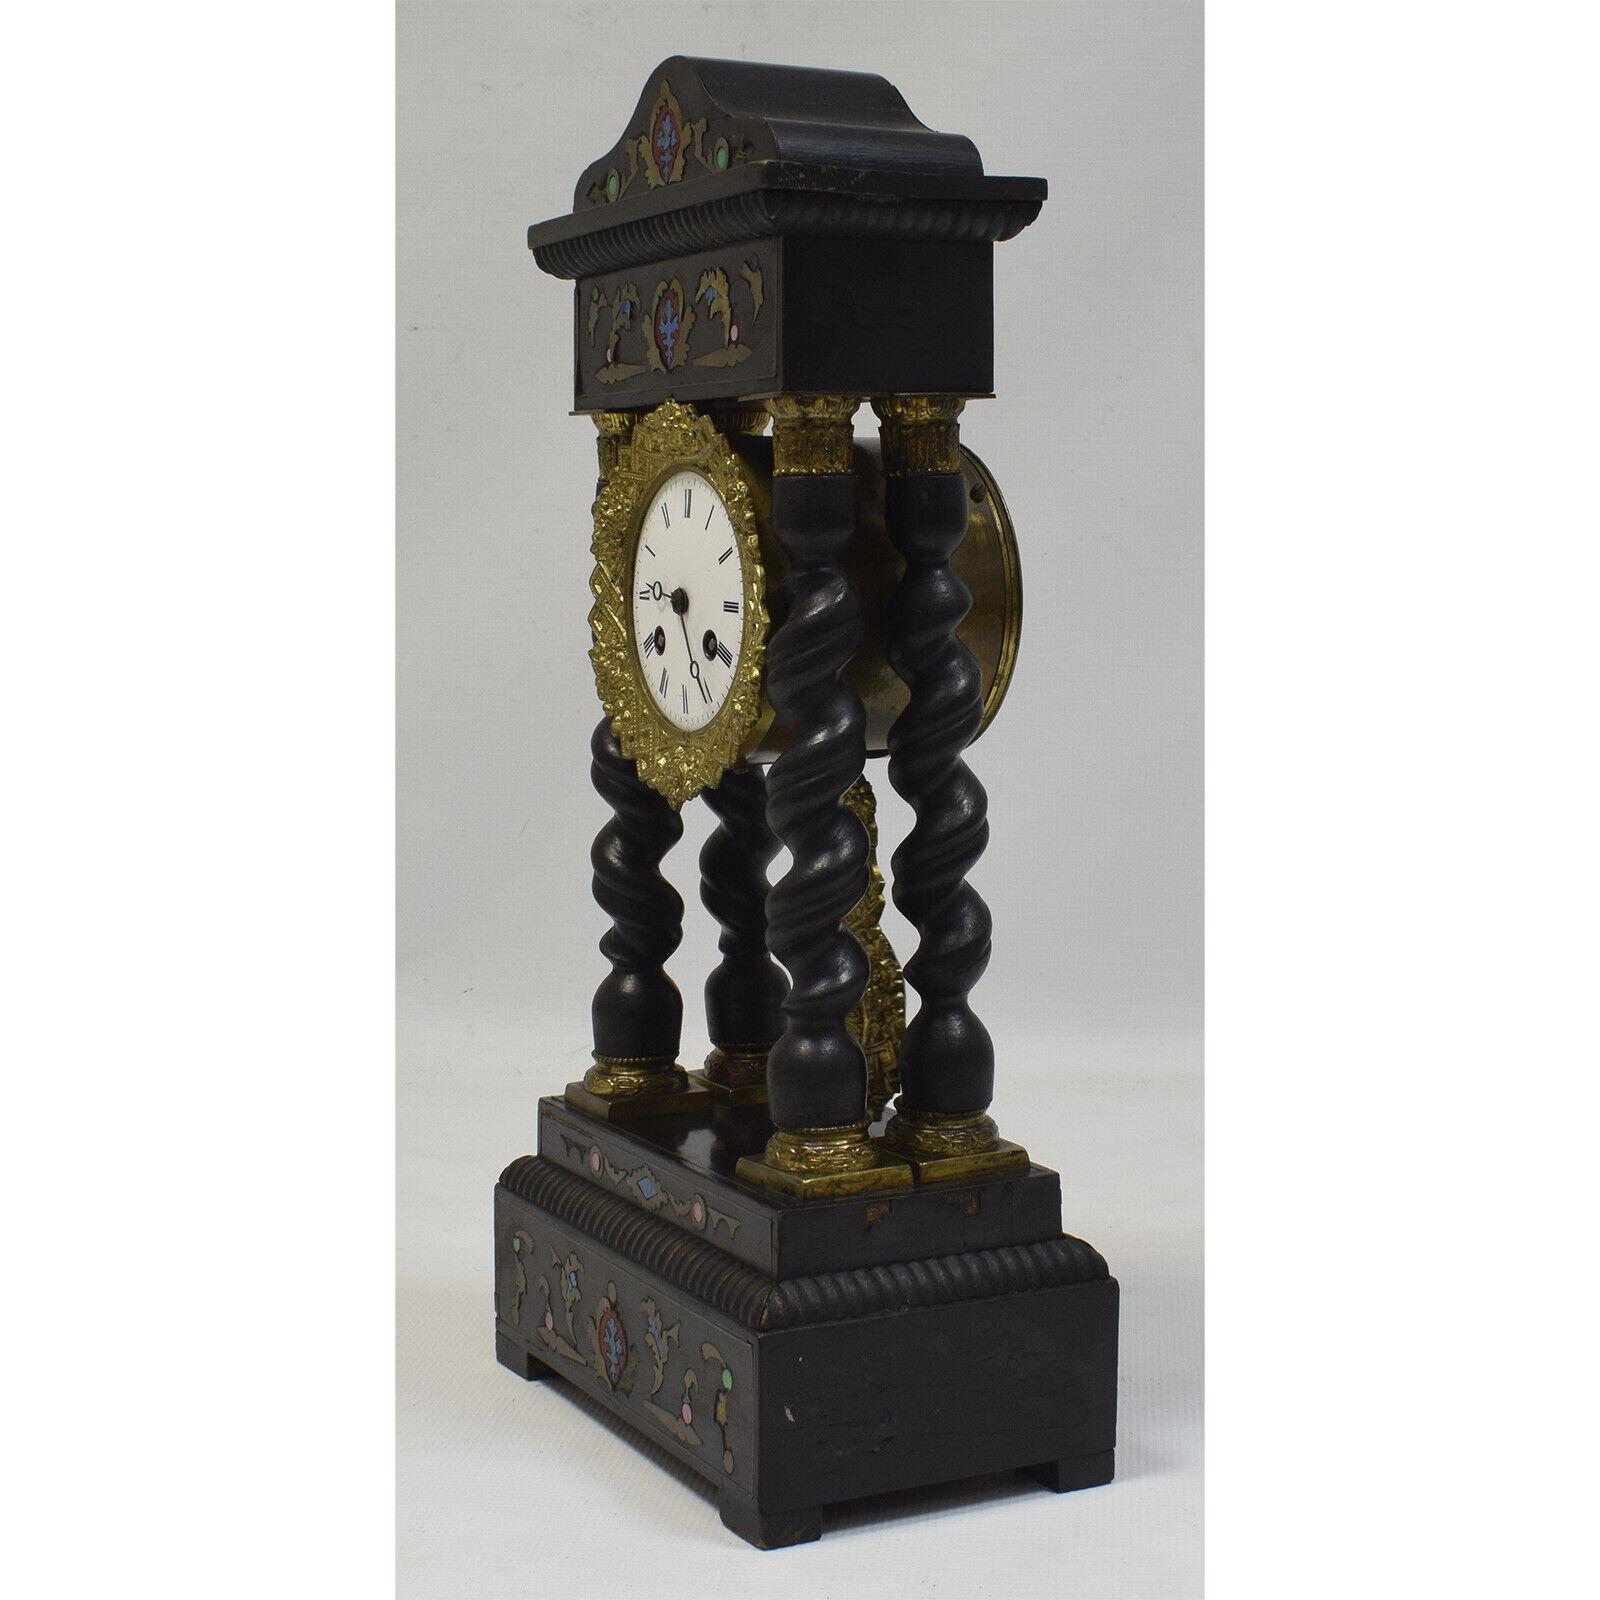 Step into the past with this functional 19th-century S.Marti column clock, a magnificent timepiece that embodies the essence of its era. Measuring 46 x 22 x 13 cm, this antique mantel clock showcases the exceptional craftsmanship and mechanical